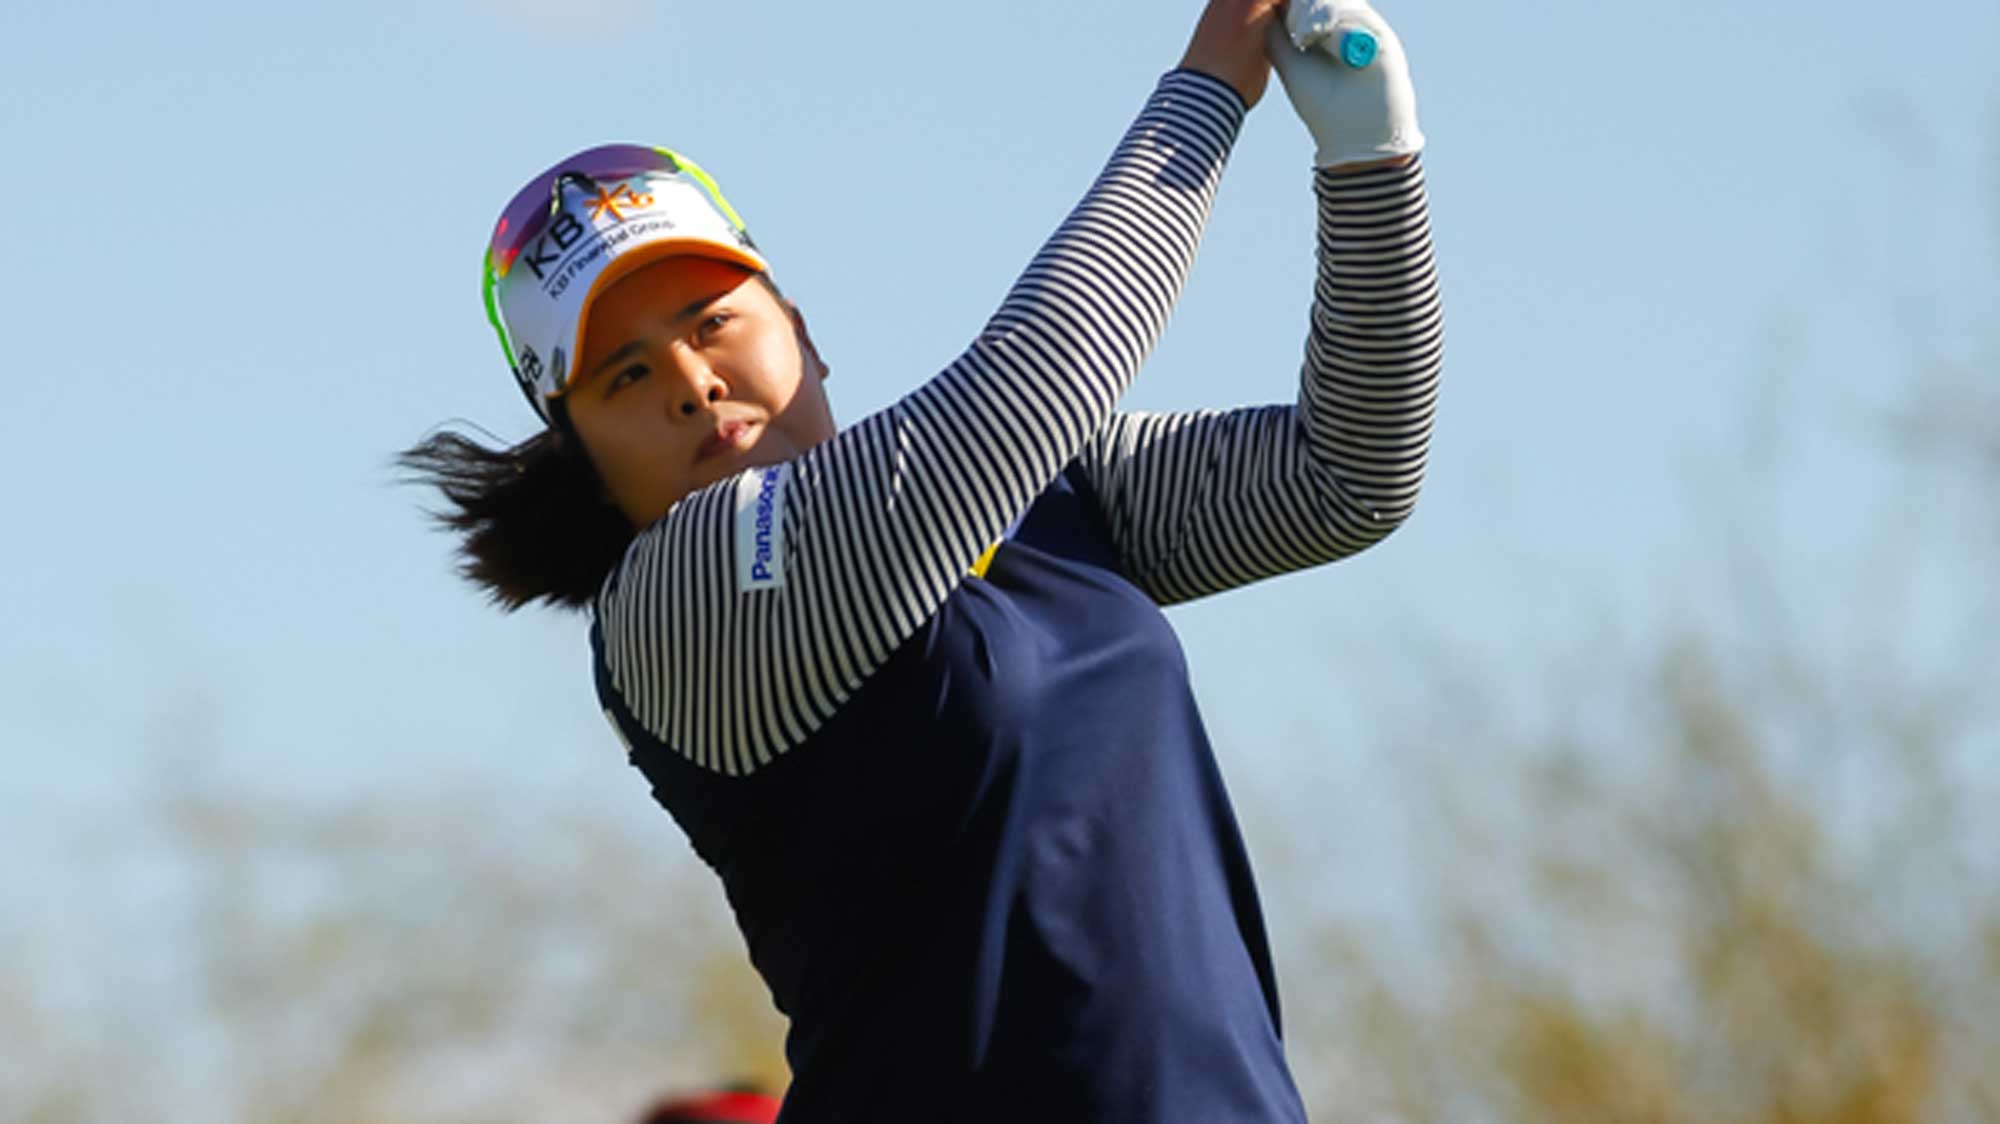 Inbee Park Has Solo Lead After 63 on Saturday